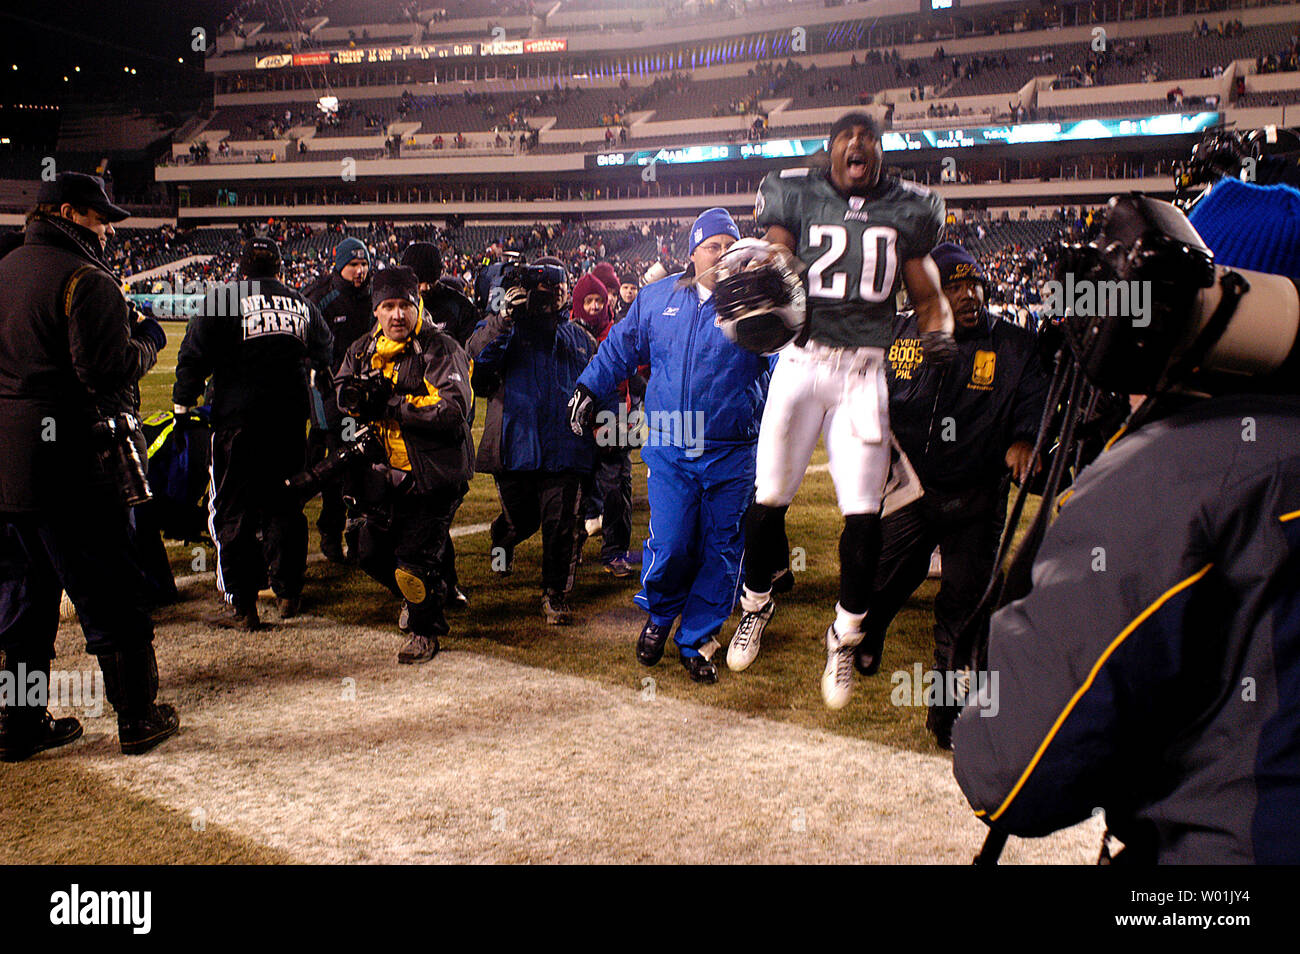 A jubilant Eagle Brian Dawkins (20) makes his way off the field following the Eagles 20 to 17 overtime victory over the Packersas Philadelphia hosts Green Bay in a divisional playoff game at the Lincoln Financial Field in Philadelphia, on January 11, 2004. (UPI Photo/Jon Adams) Stock Photo